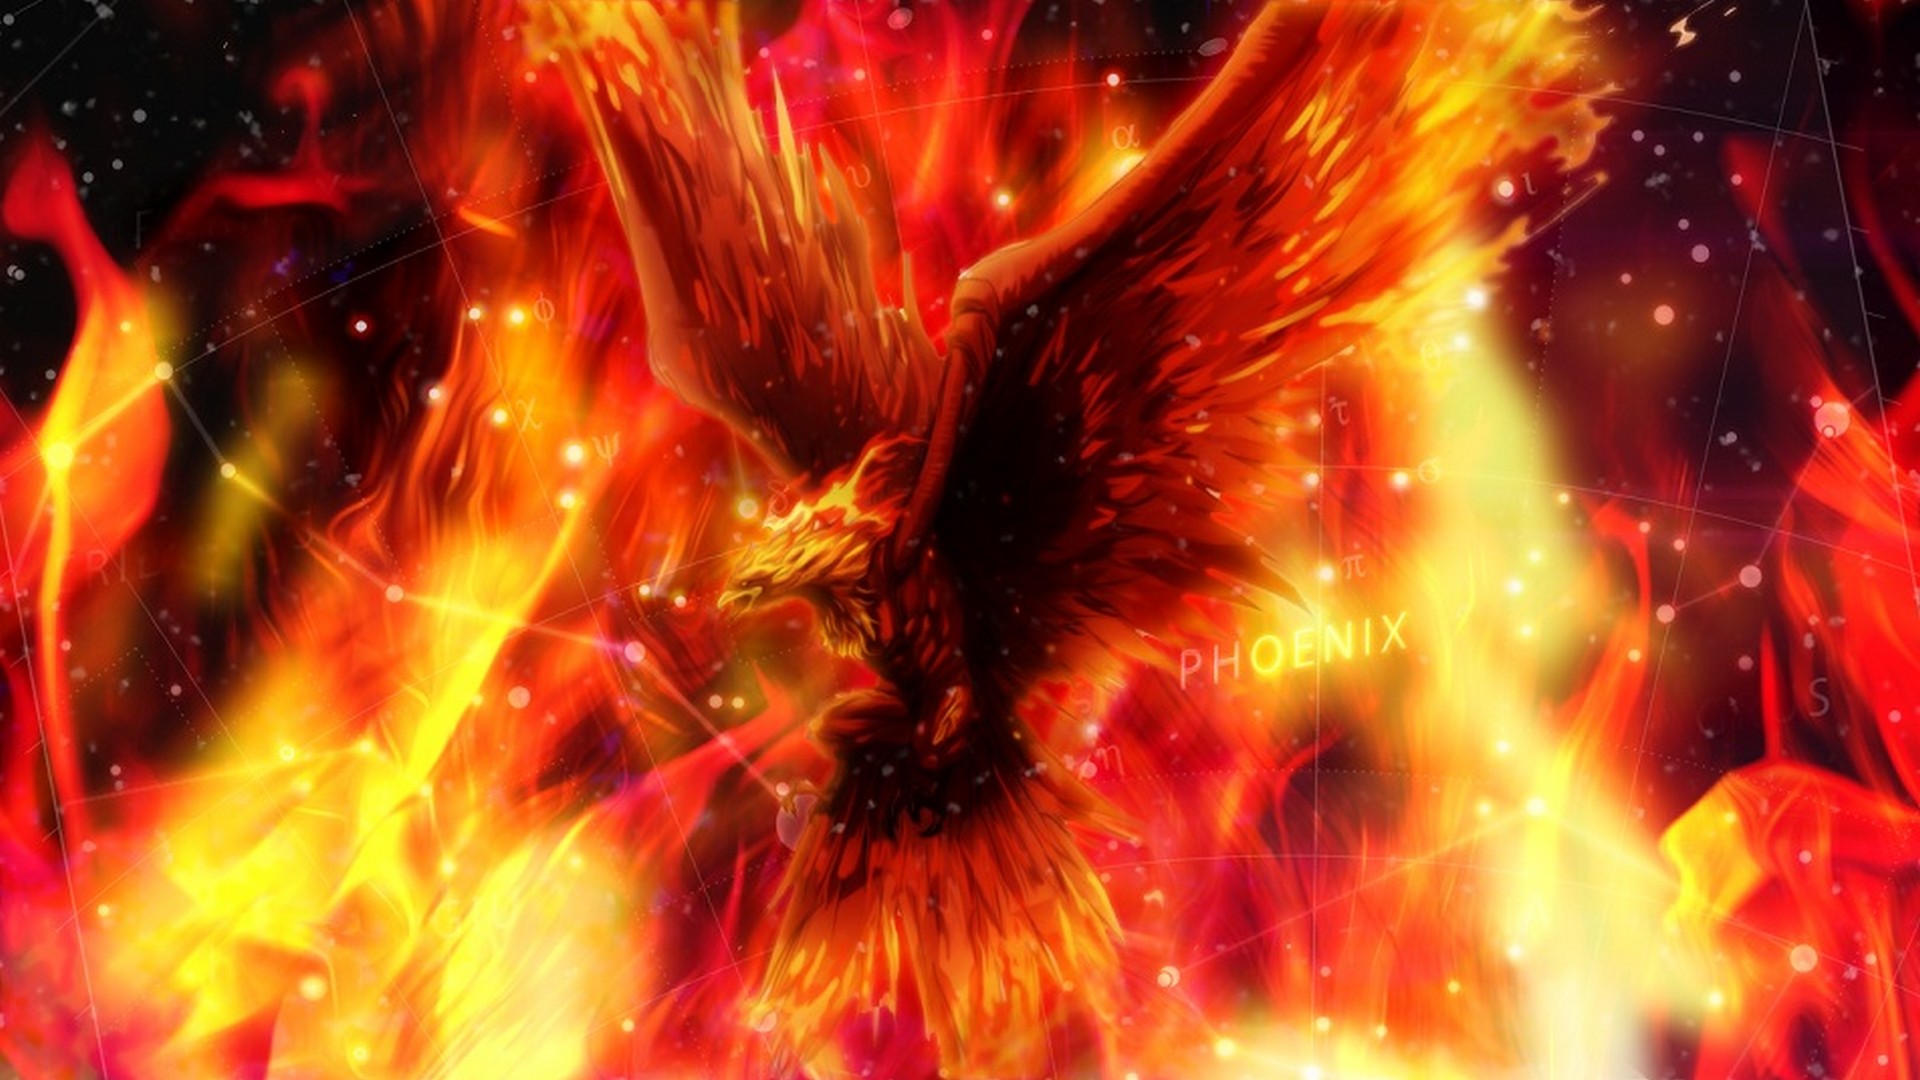 Dark Phoenix Desktop Wallpaper with image resolution 1920x1080 pixel. You can use this wallpaper as background for your desktop Computer Screensavers, Android or iPhone smartphones